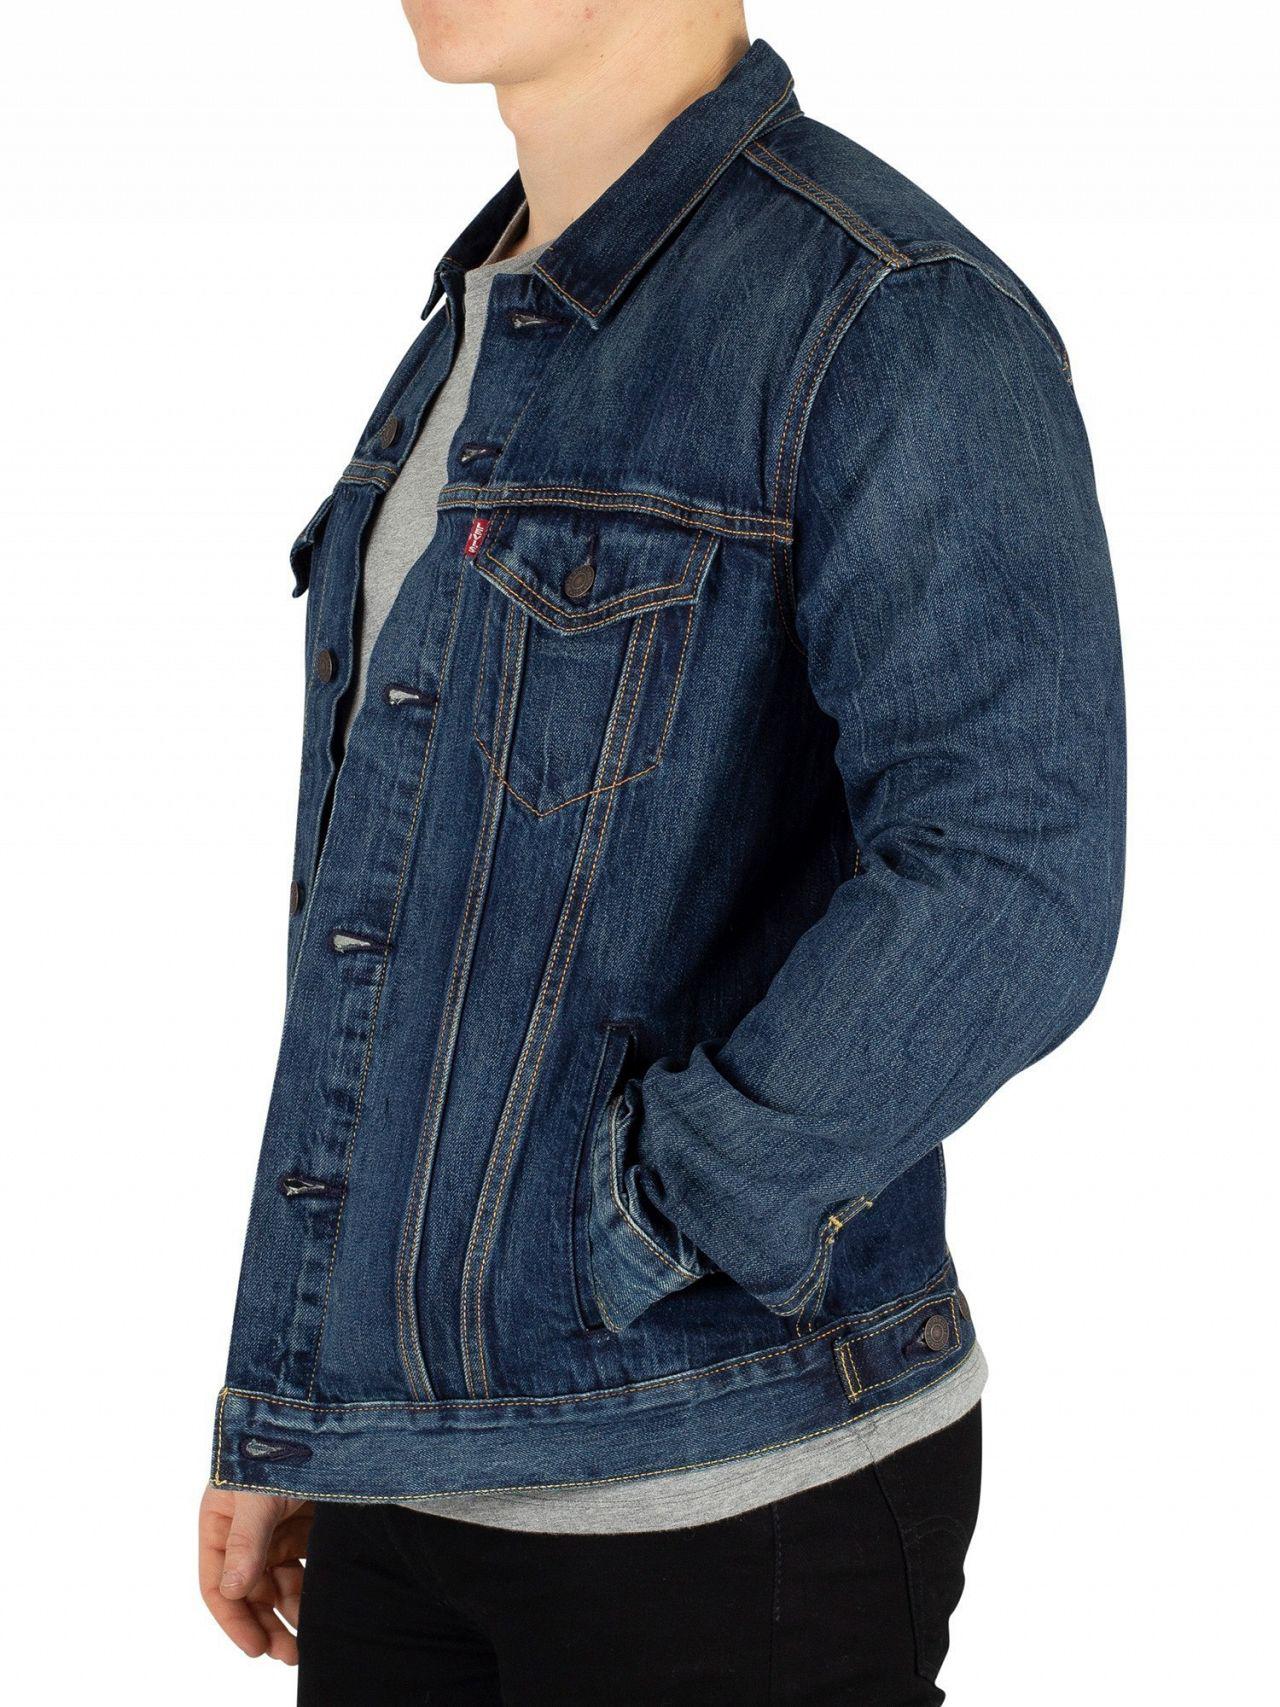 Levi's Cotton Palmer The Trucker Jacket in Blue for Men - Lyst